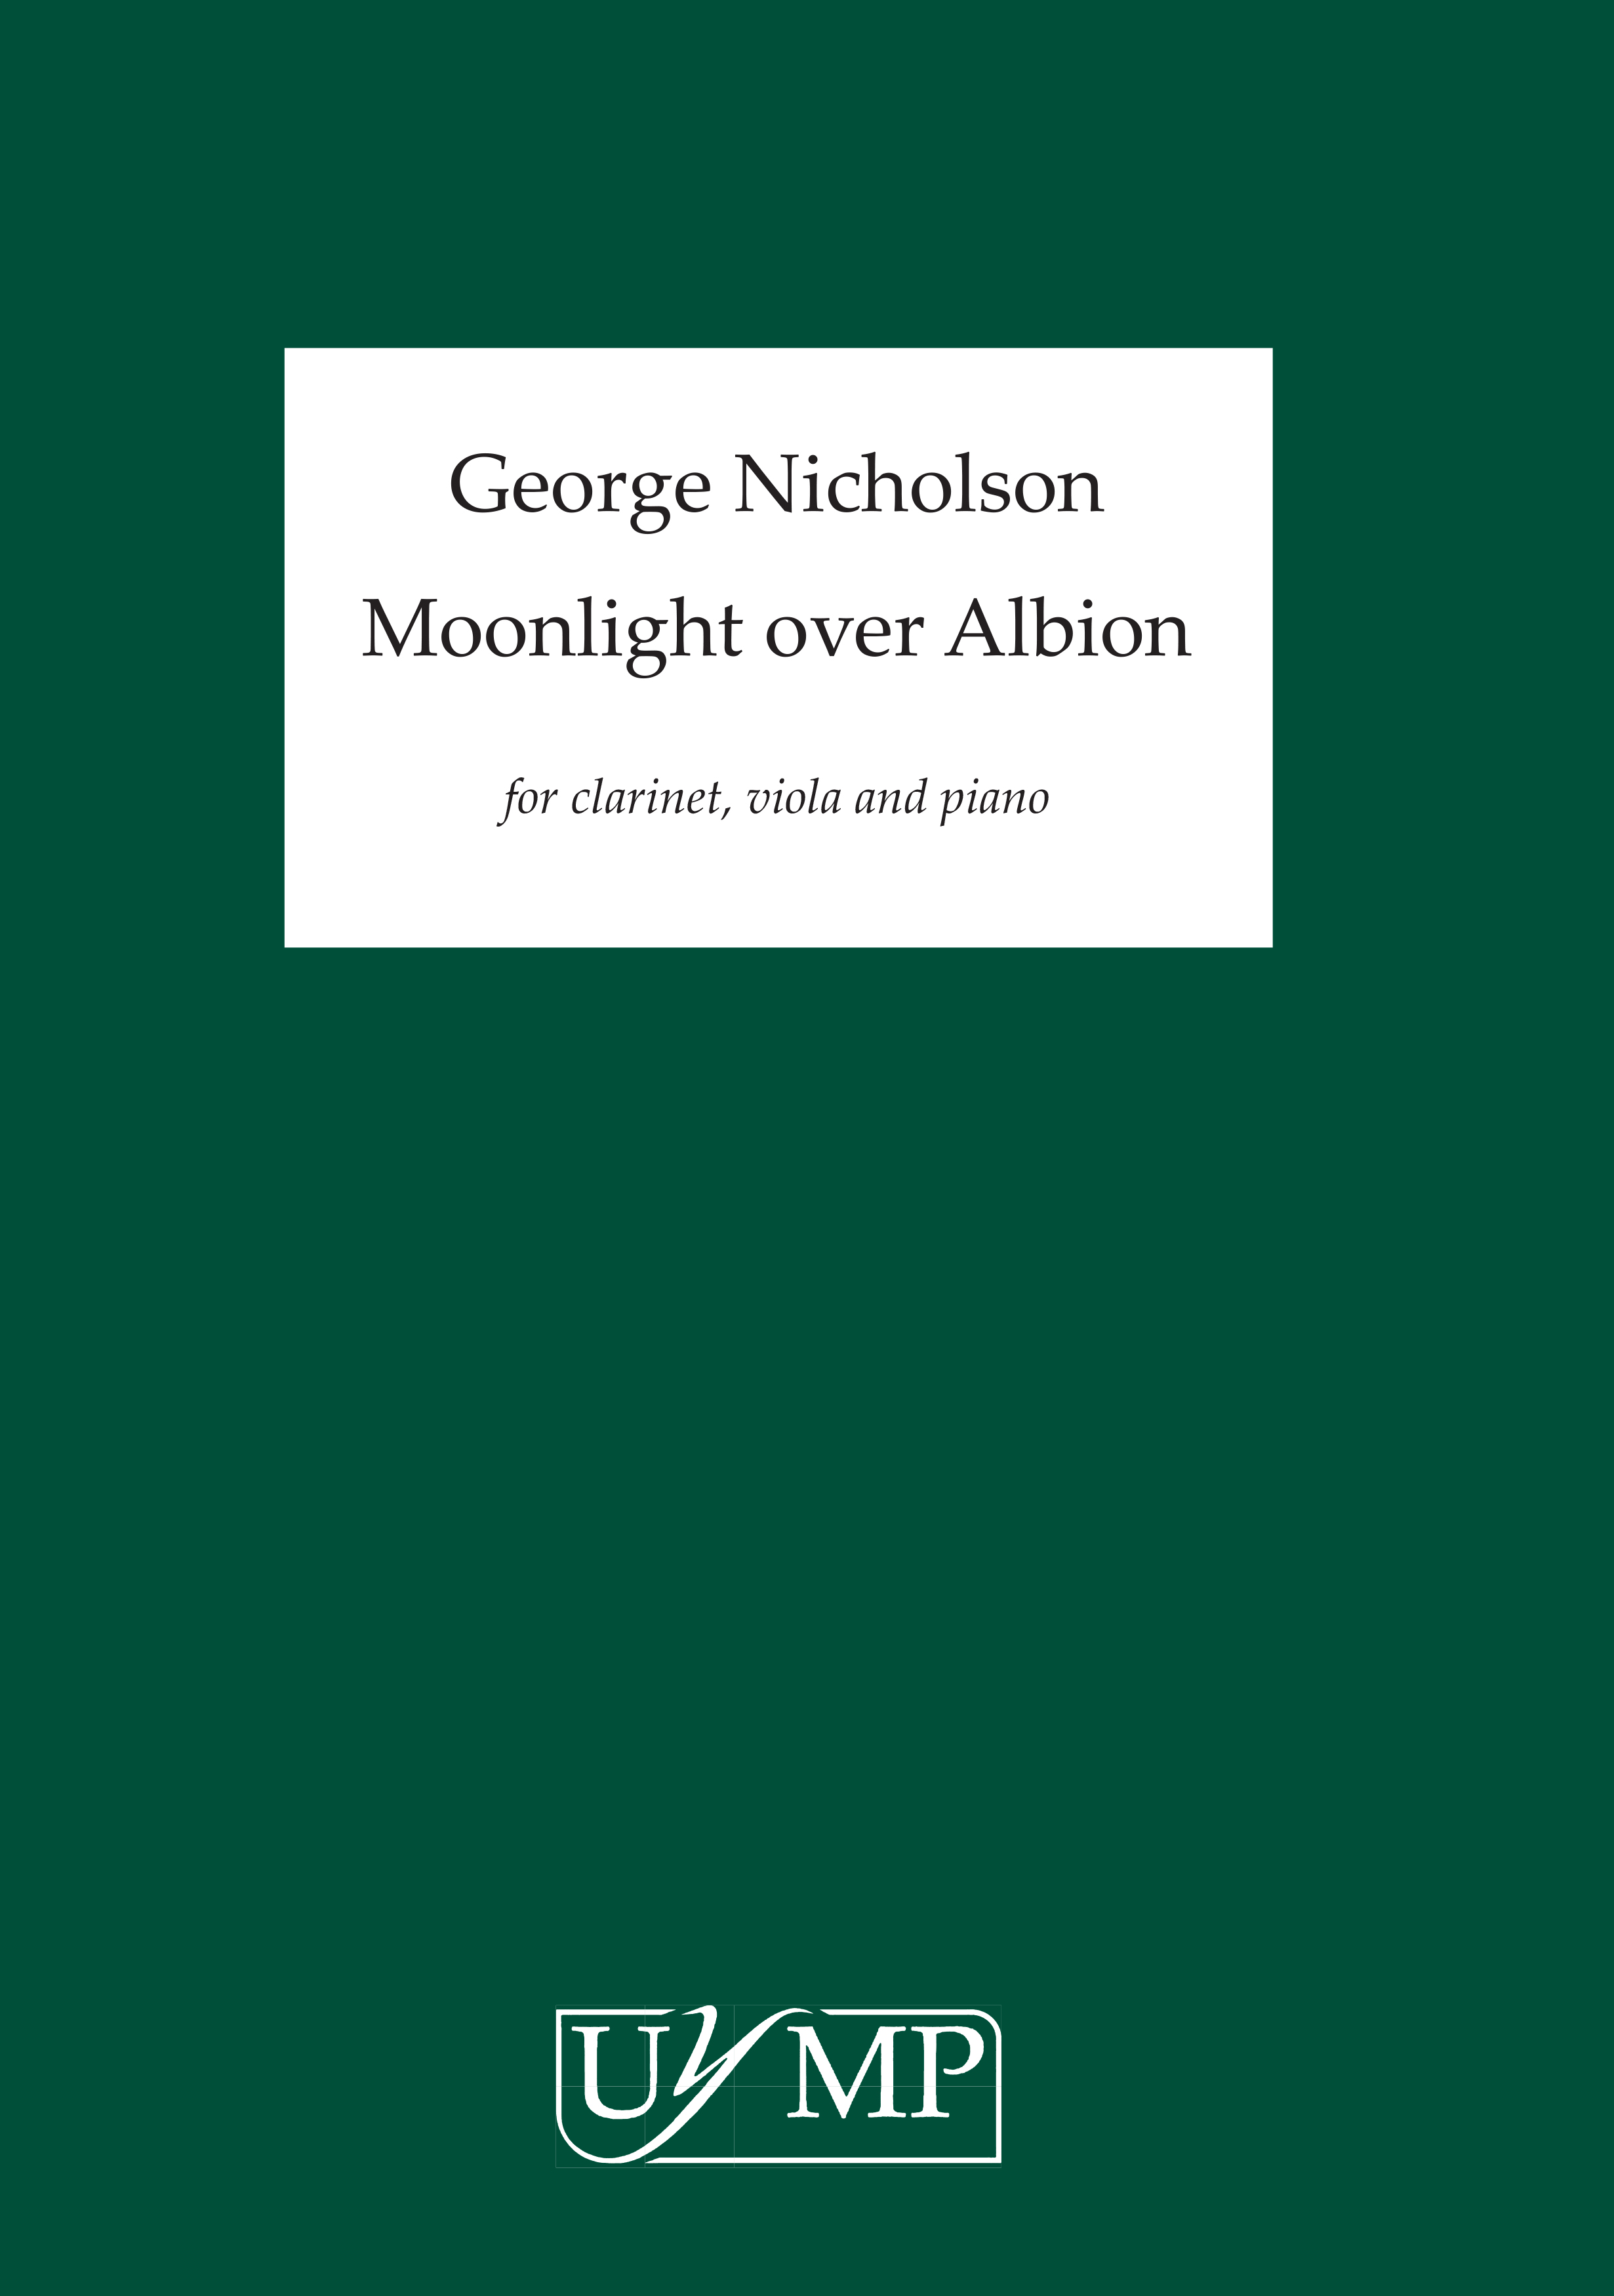 George Nicholson: Moonlight Over Albion (3 Playing Scores)